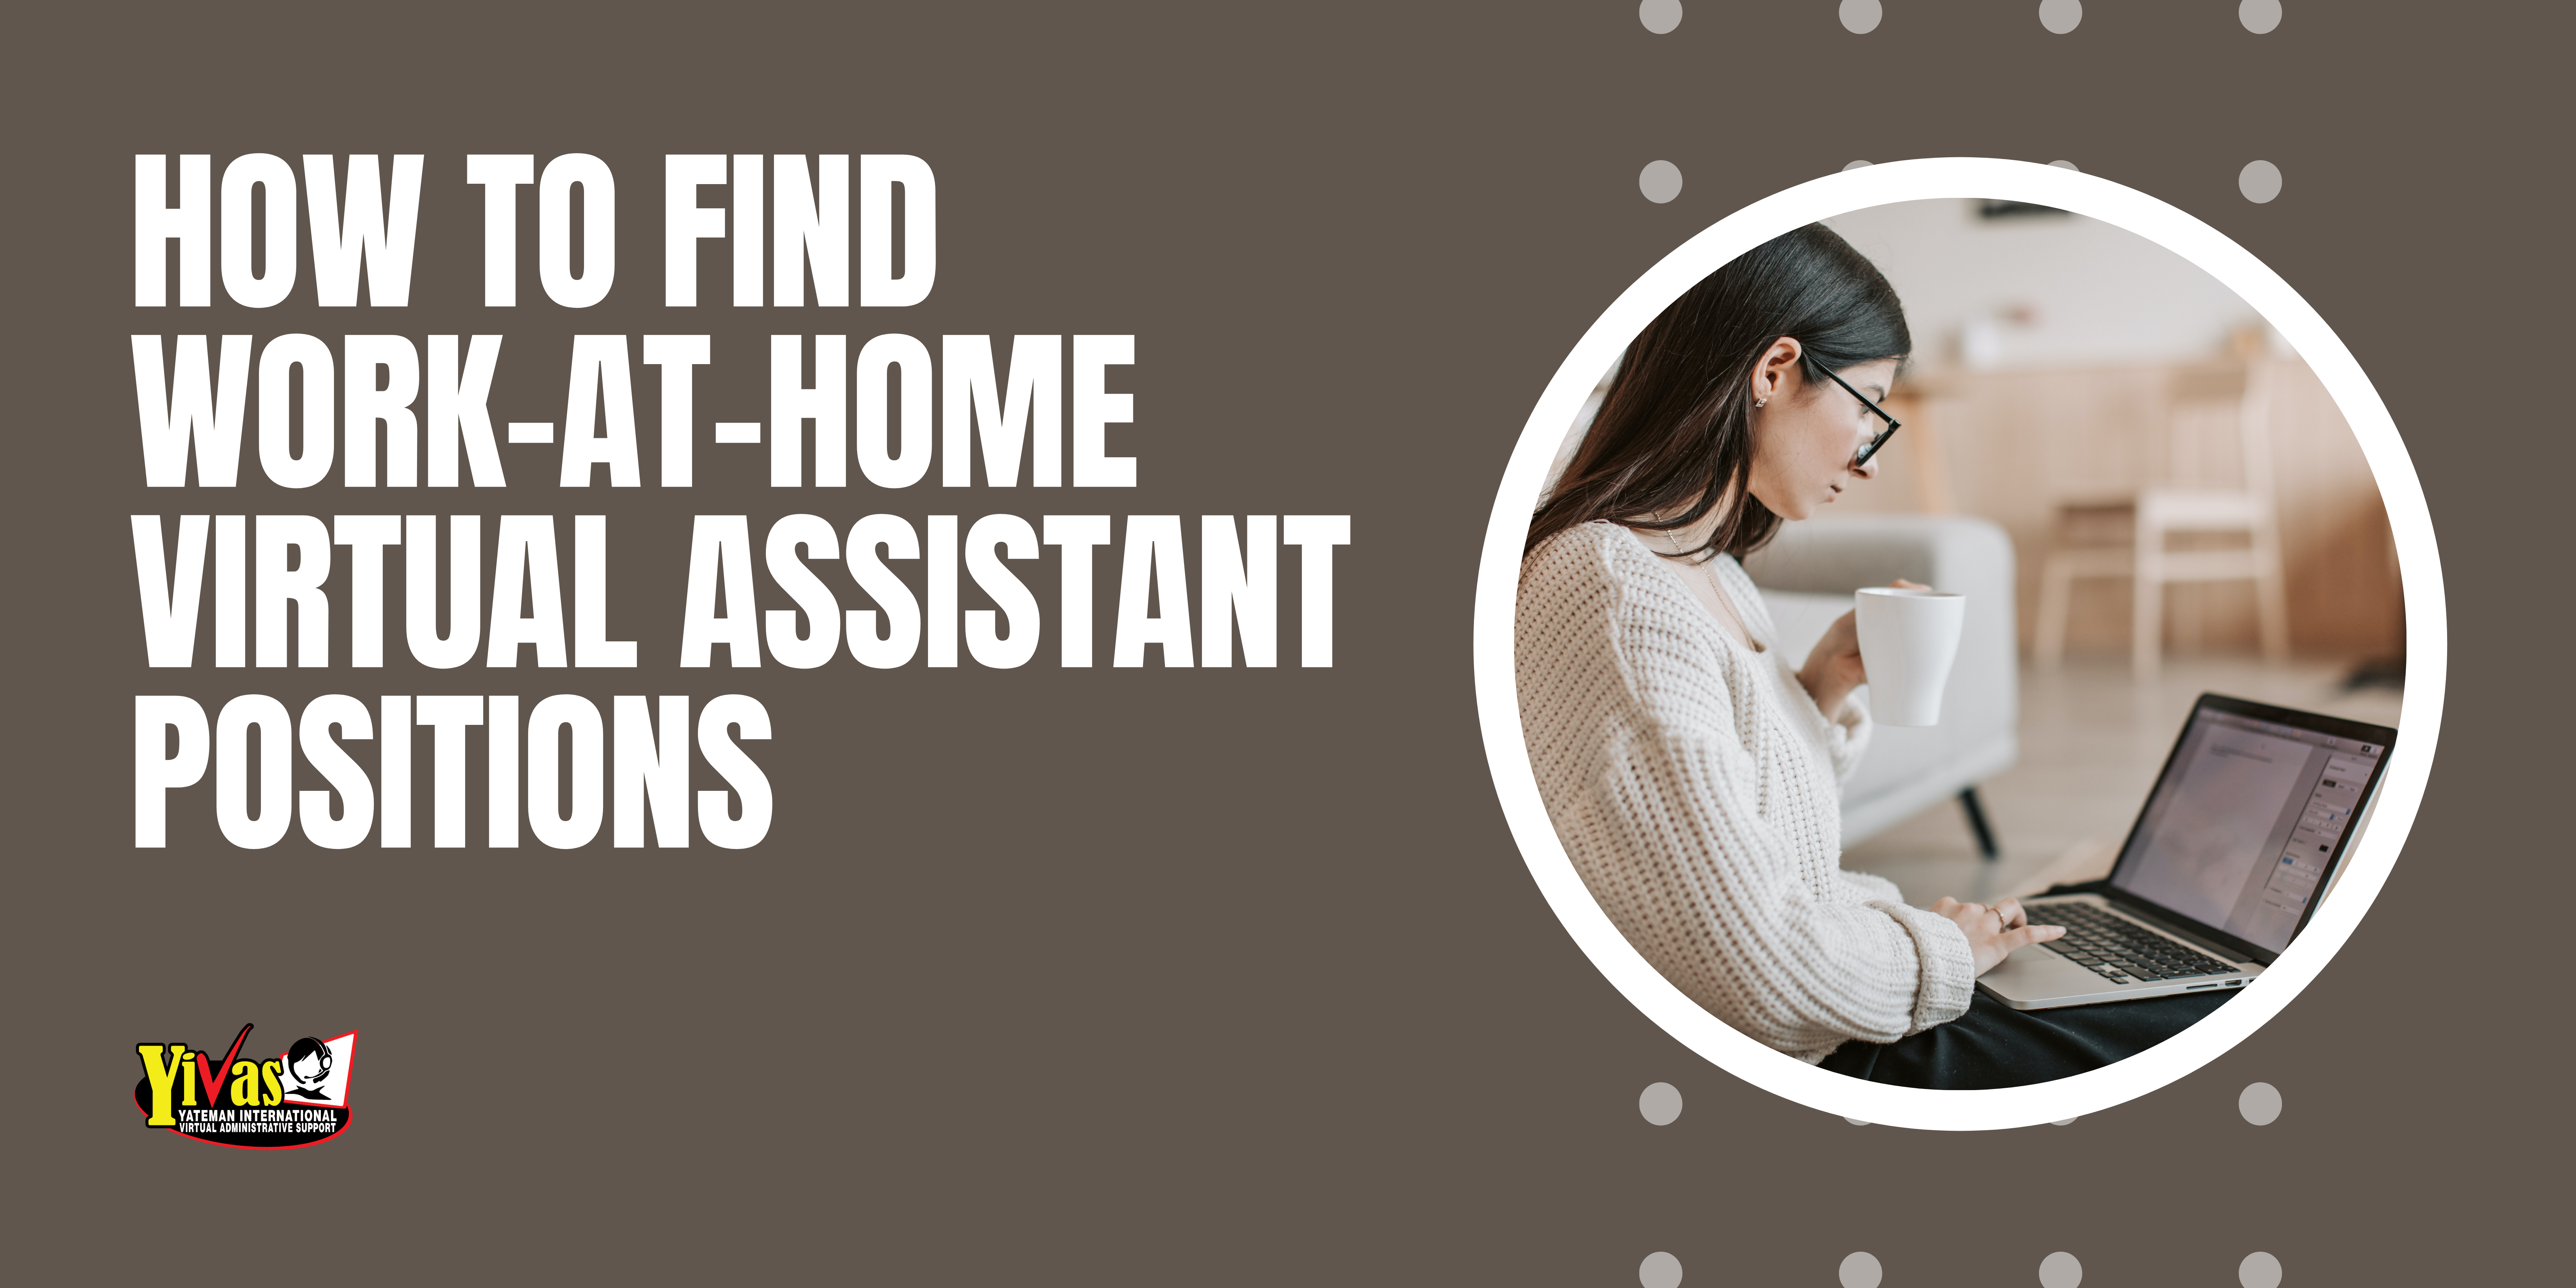 How to Find Work-At-Home Virtual Assistant Positions